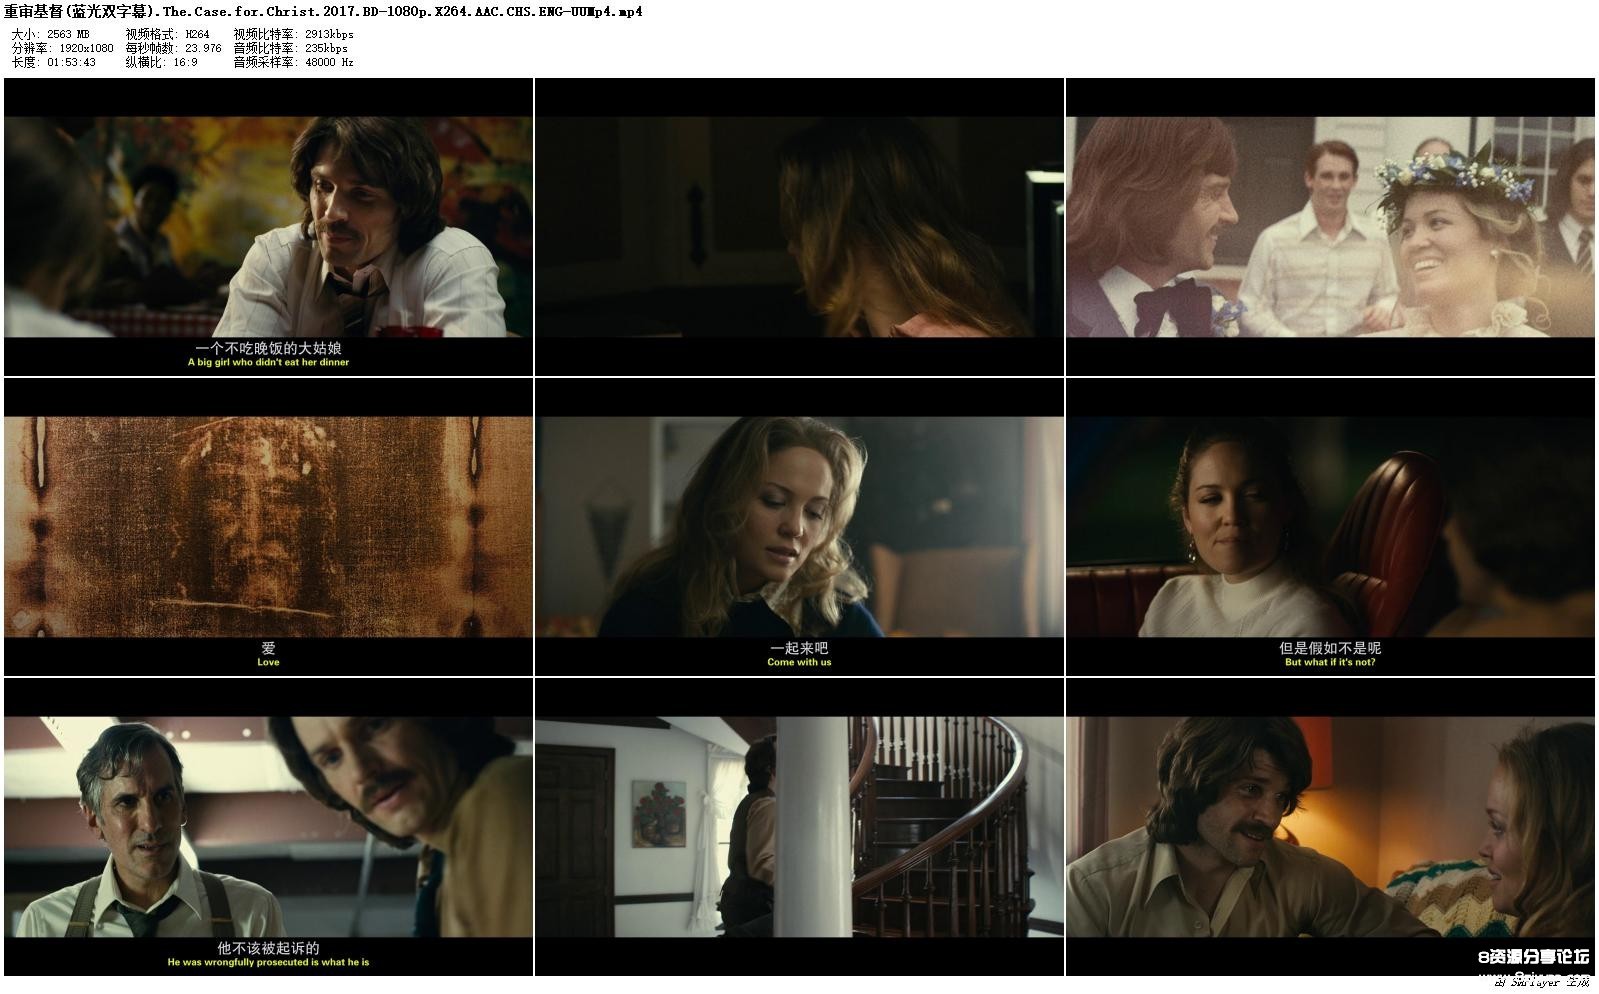 .The.Case.for.Christ.2017.BD-1080p.X264.AAC.CHS.ENG-UUMp4_preview.jpg